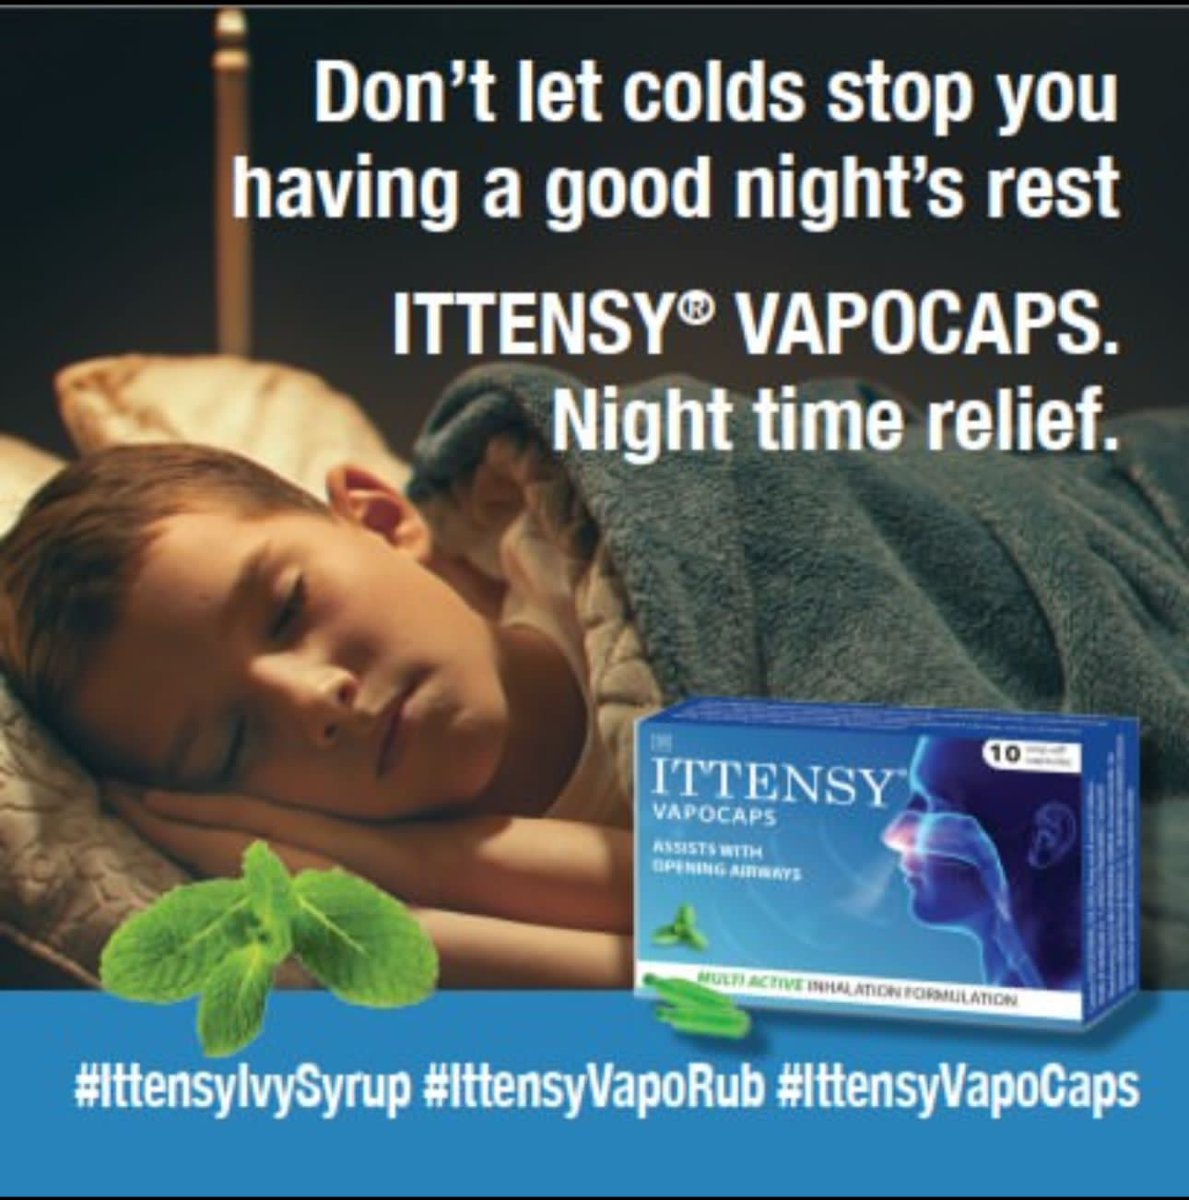 ITTENSY® IVY SYRUP helps clear respiratory congestion and reduce coughing. #ittensyCare #ittensyWellness